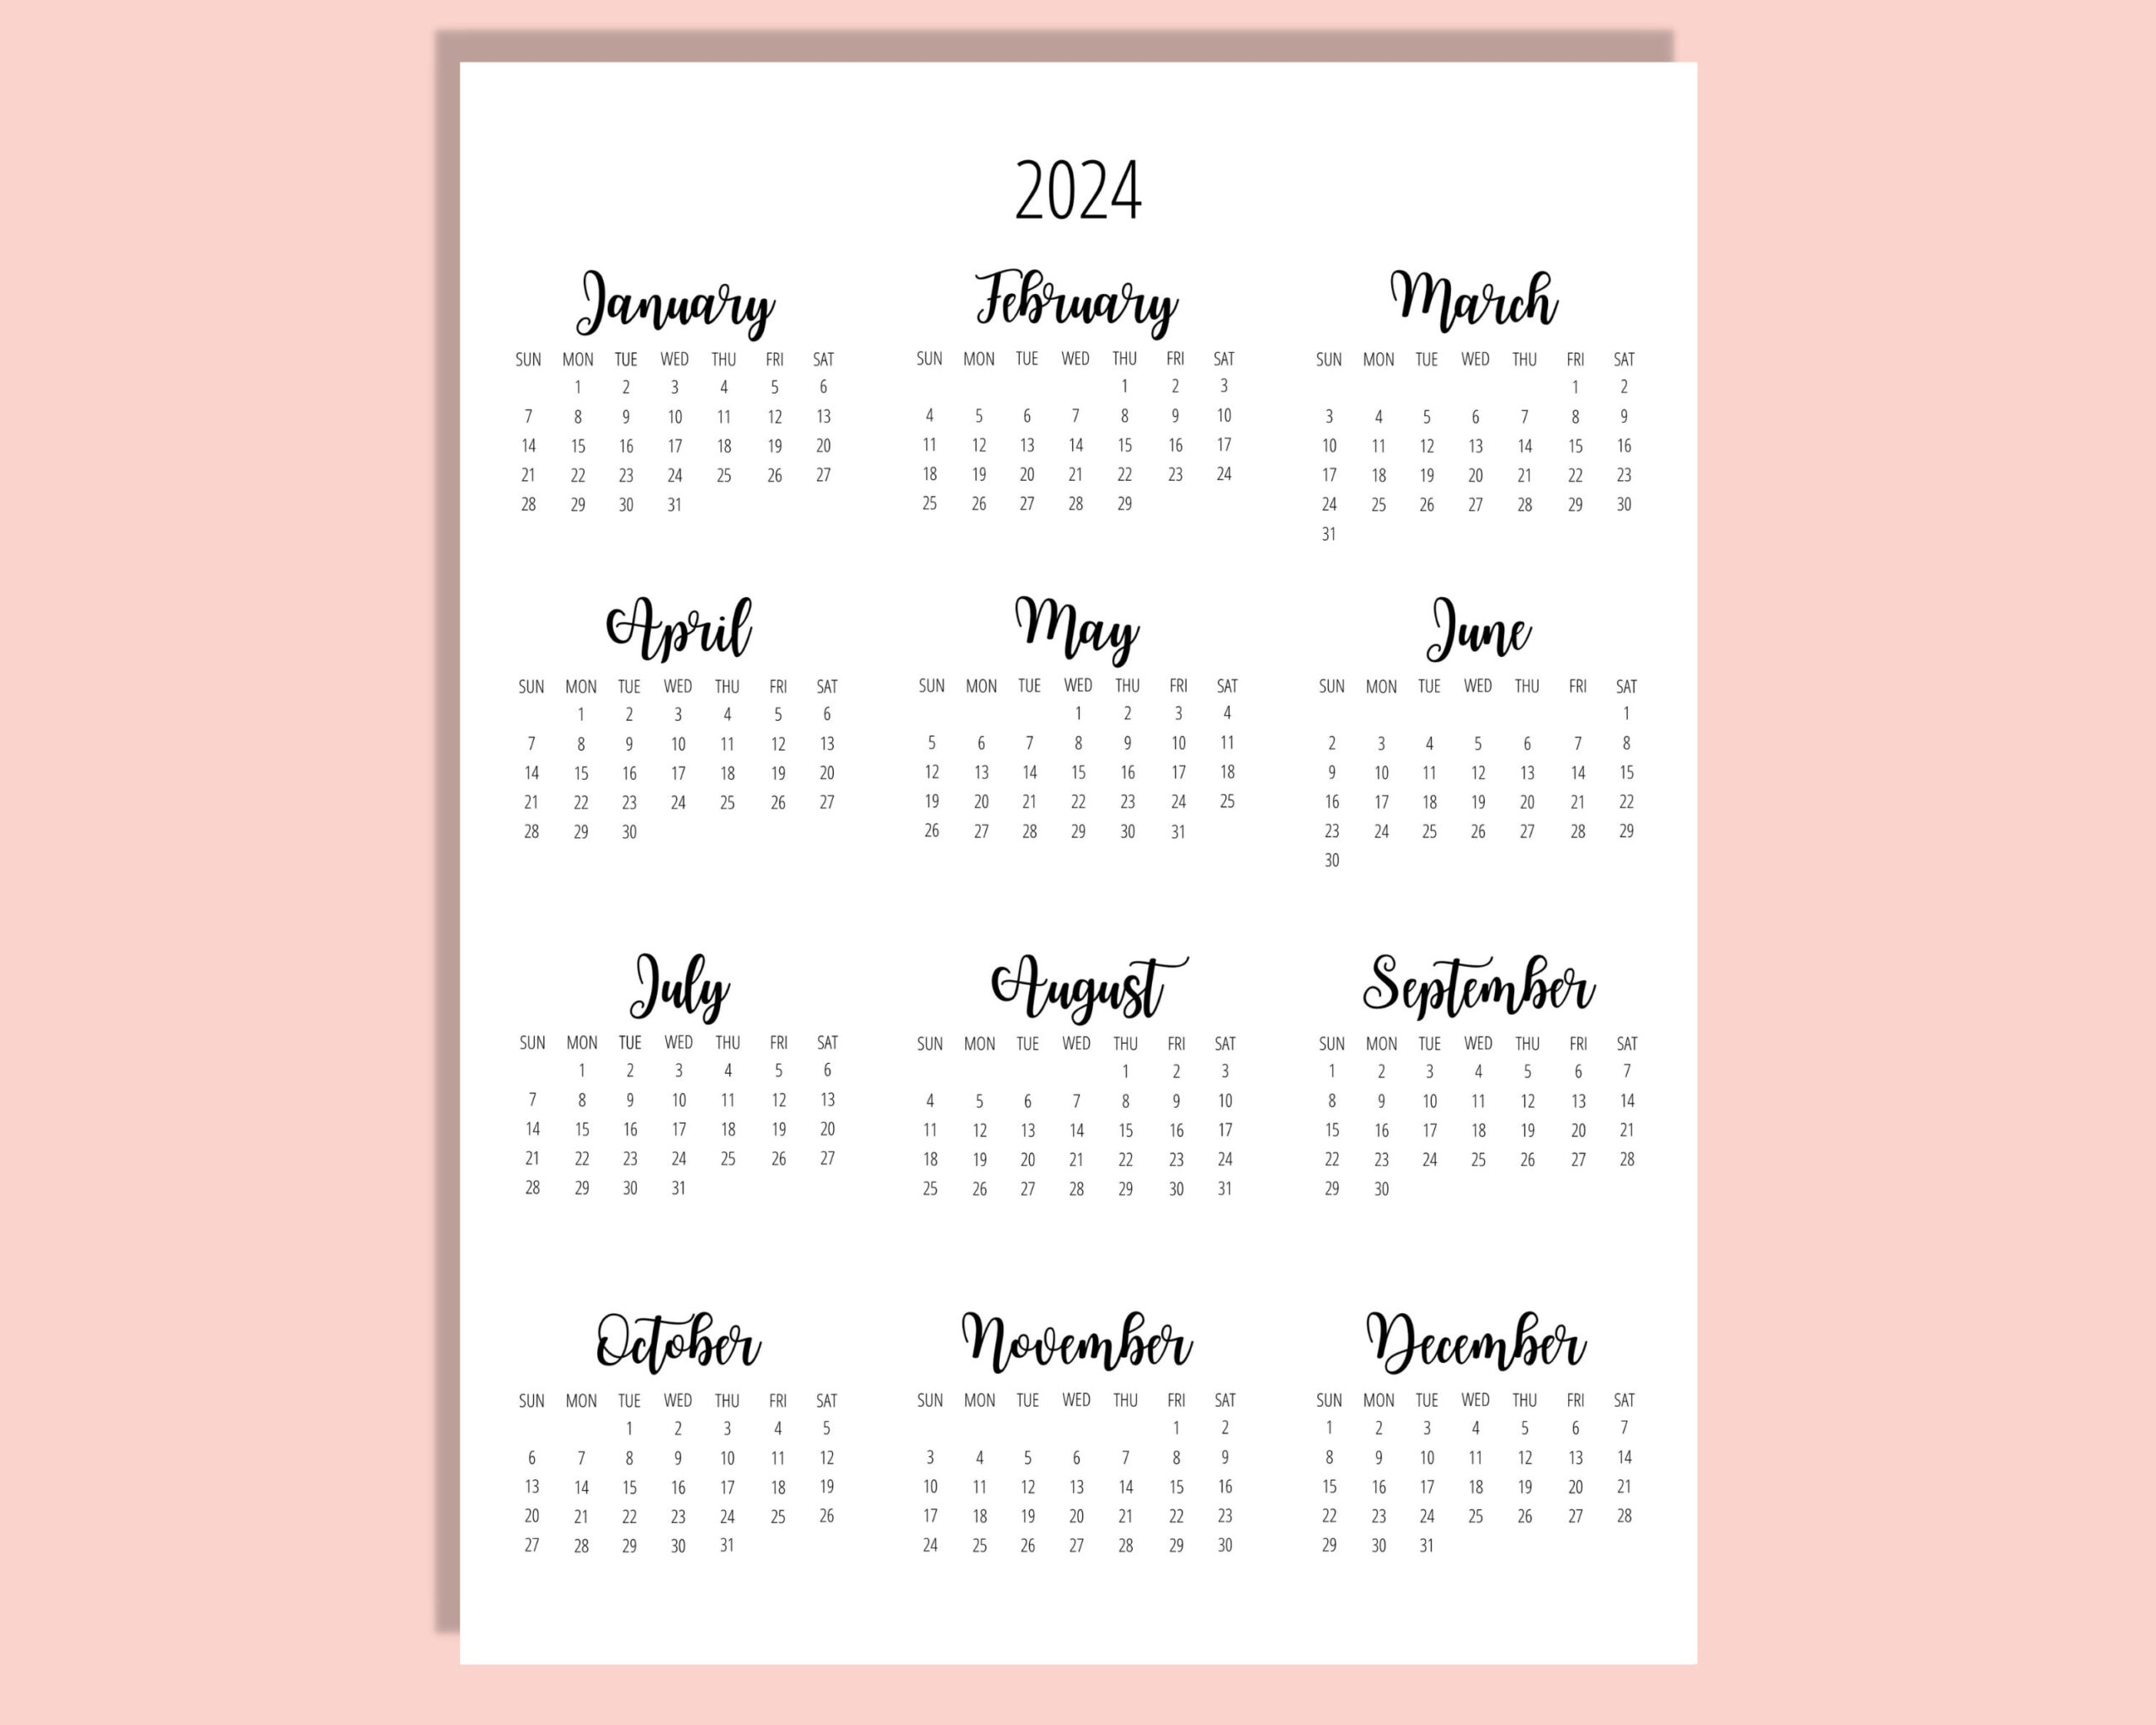 2024 Calendar Template 8.5 X 11 Inches Vertical Year At A - Etsy for Printable Desk Calendar 2024